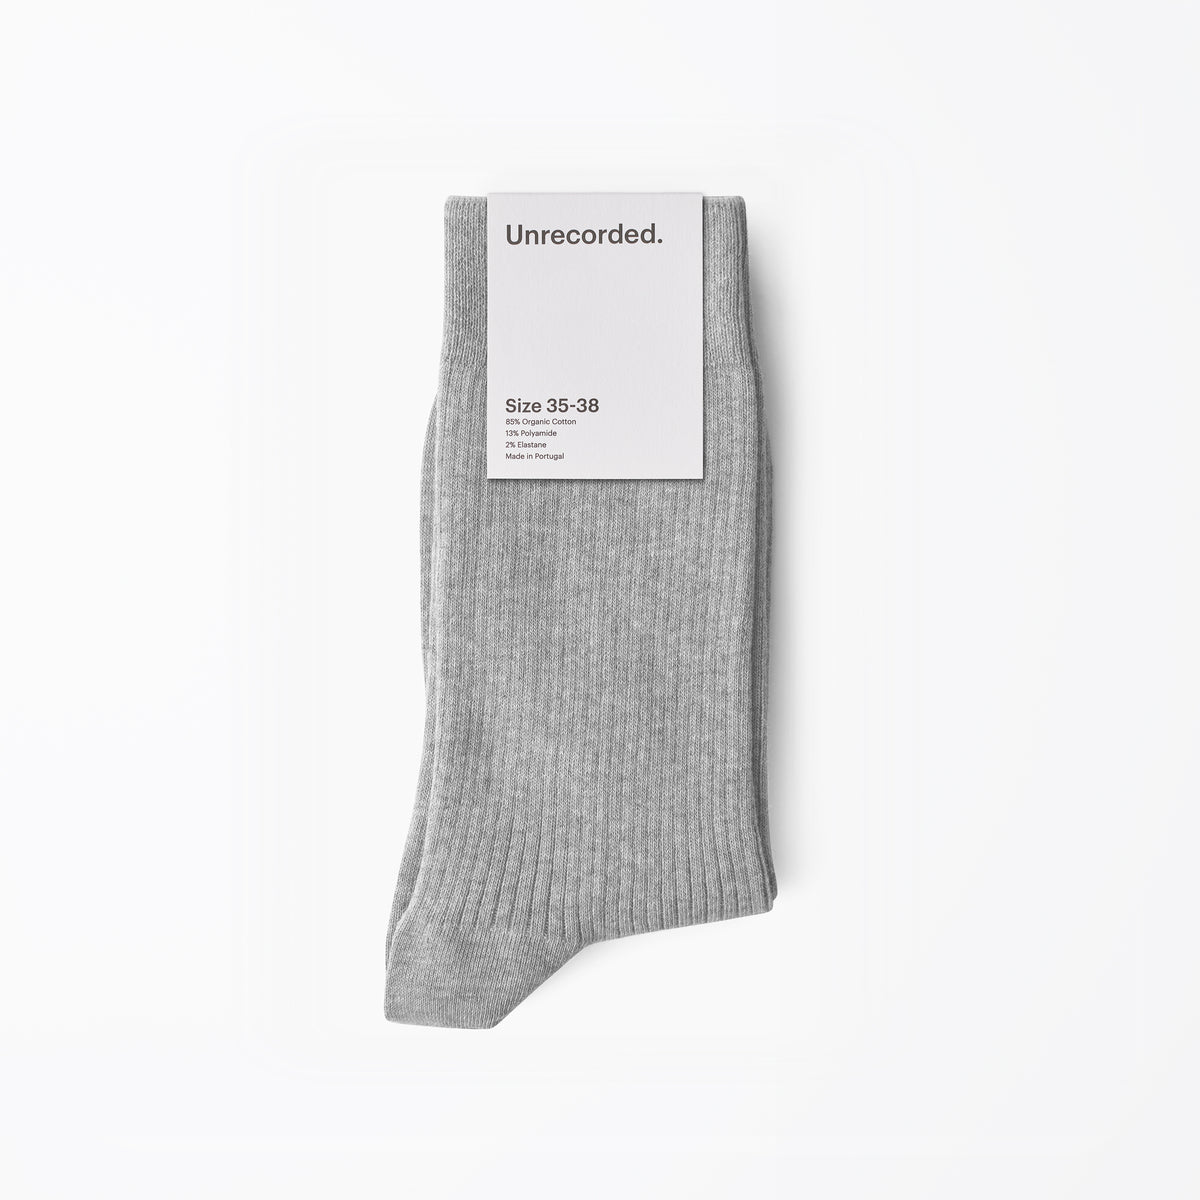 Socks Grey knitted in Portugal from an organic cotton blend - Front Women - Front Men